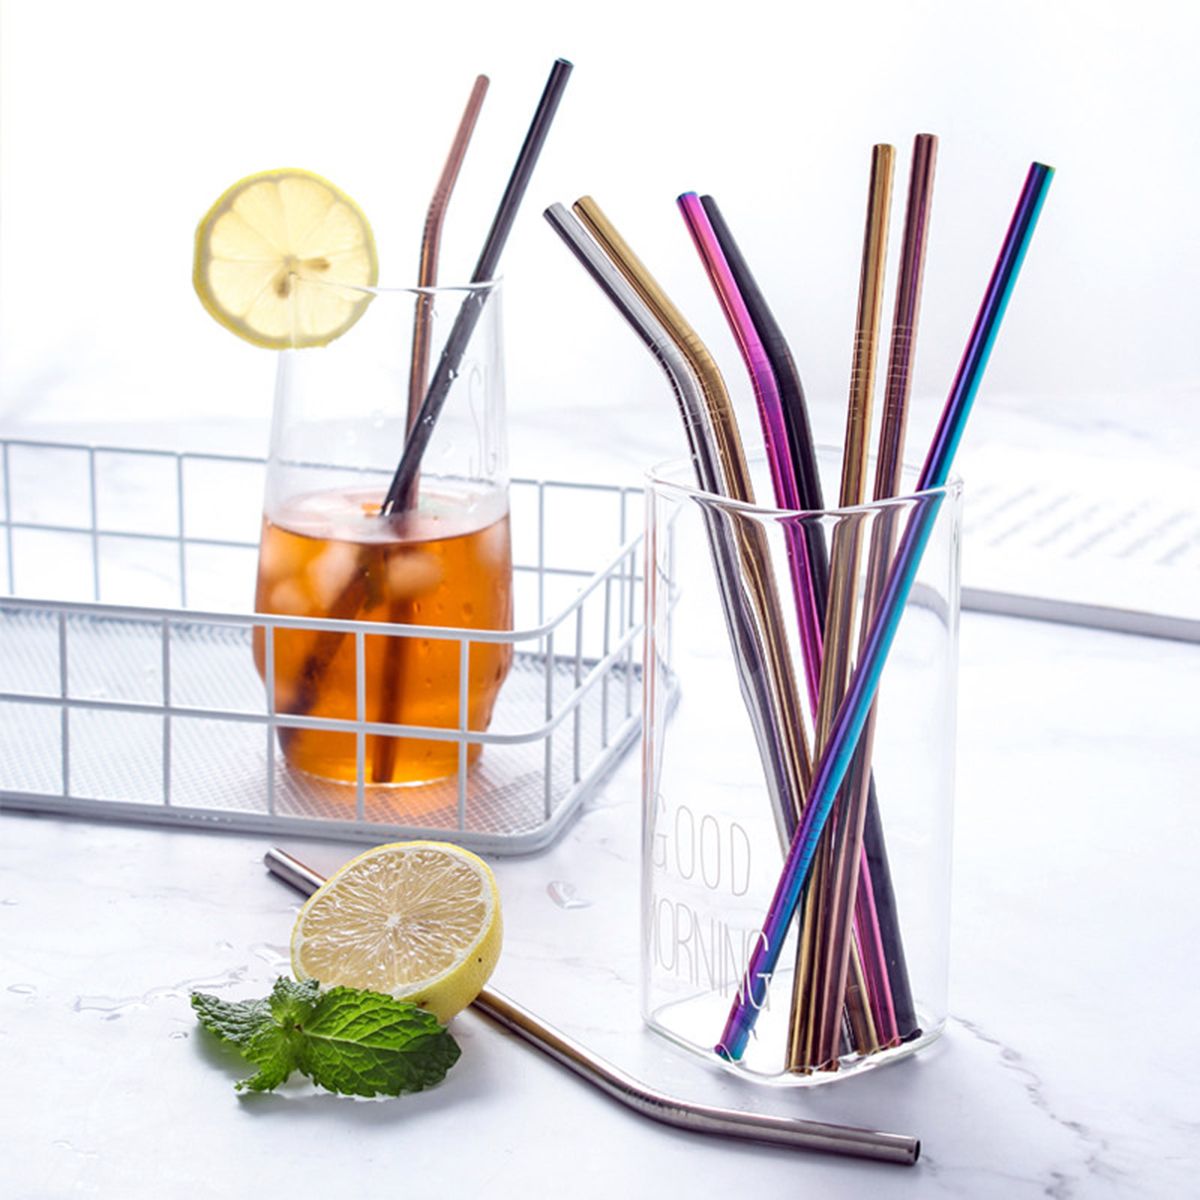 7-Colors-215x6mm-Reusable-Drinking-Stainless-Steel-Metal-Straw-Supplies-for-Party-Club-Cafe-1479300